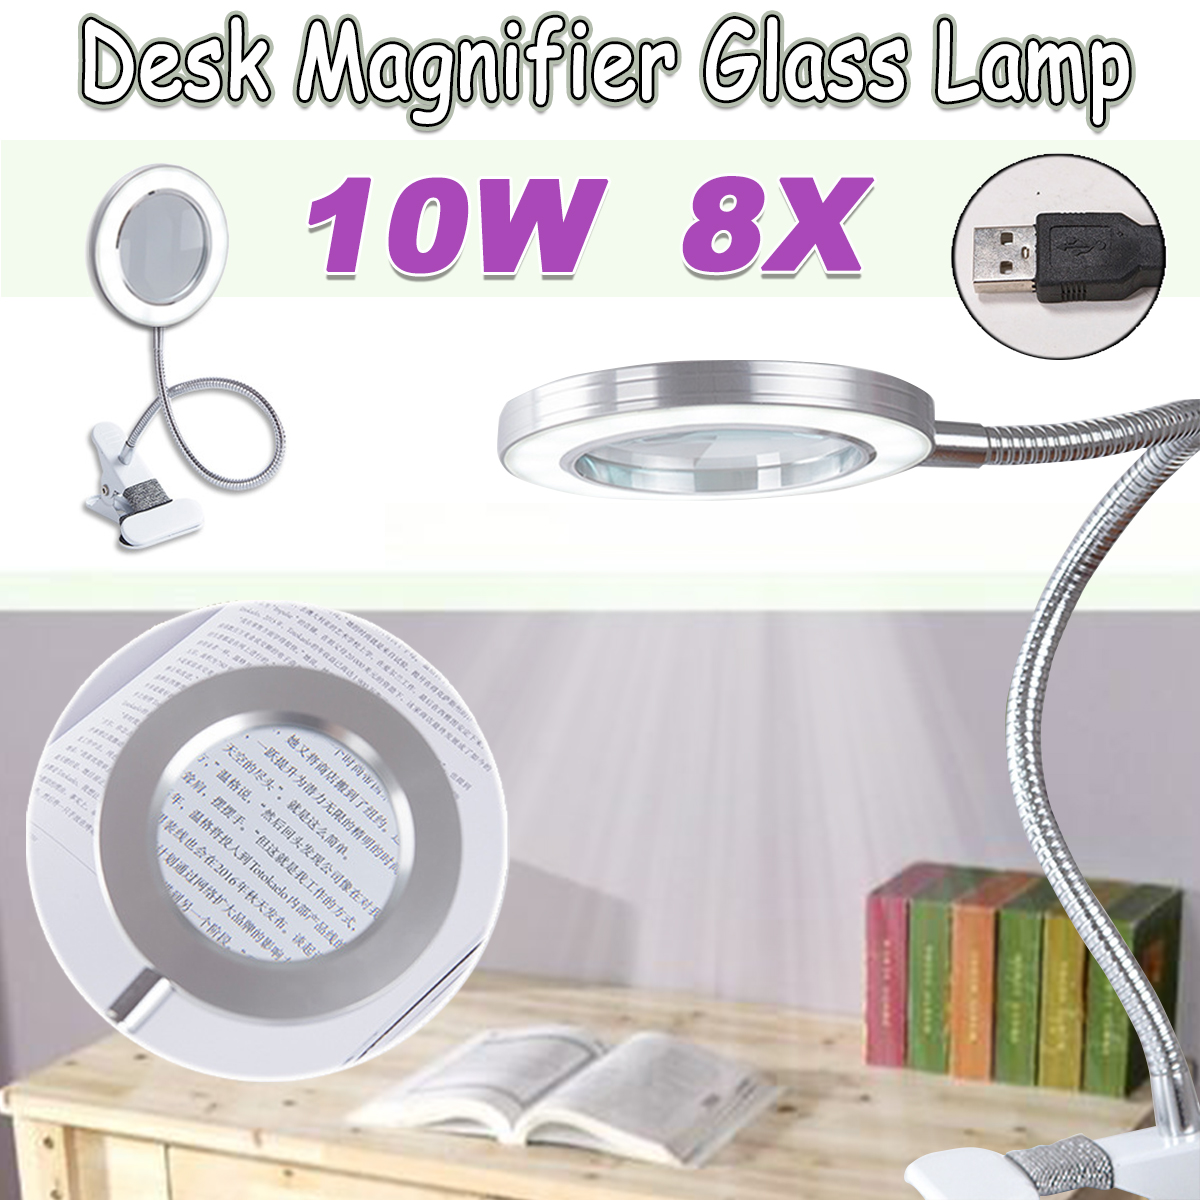 10W-X8-Magnifying-Lamp-Desk-Table-Top-Glass-Beauty-Nail-Salon-Tattoo-Magnifier-Light-1763706-1